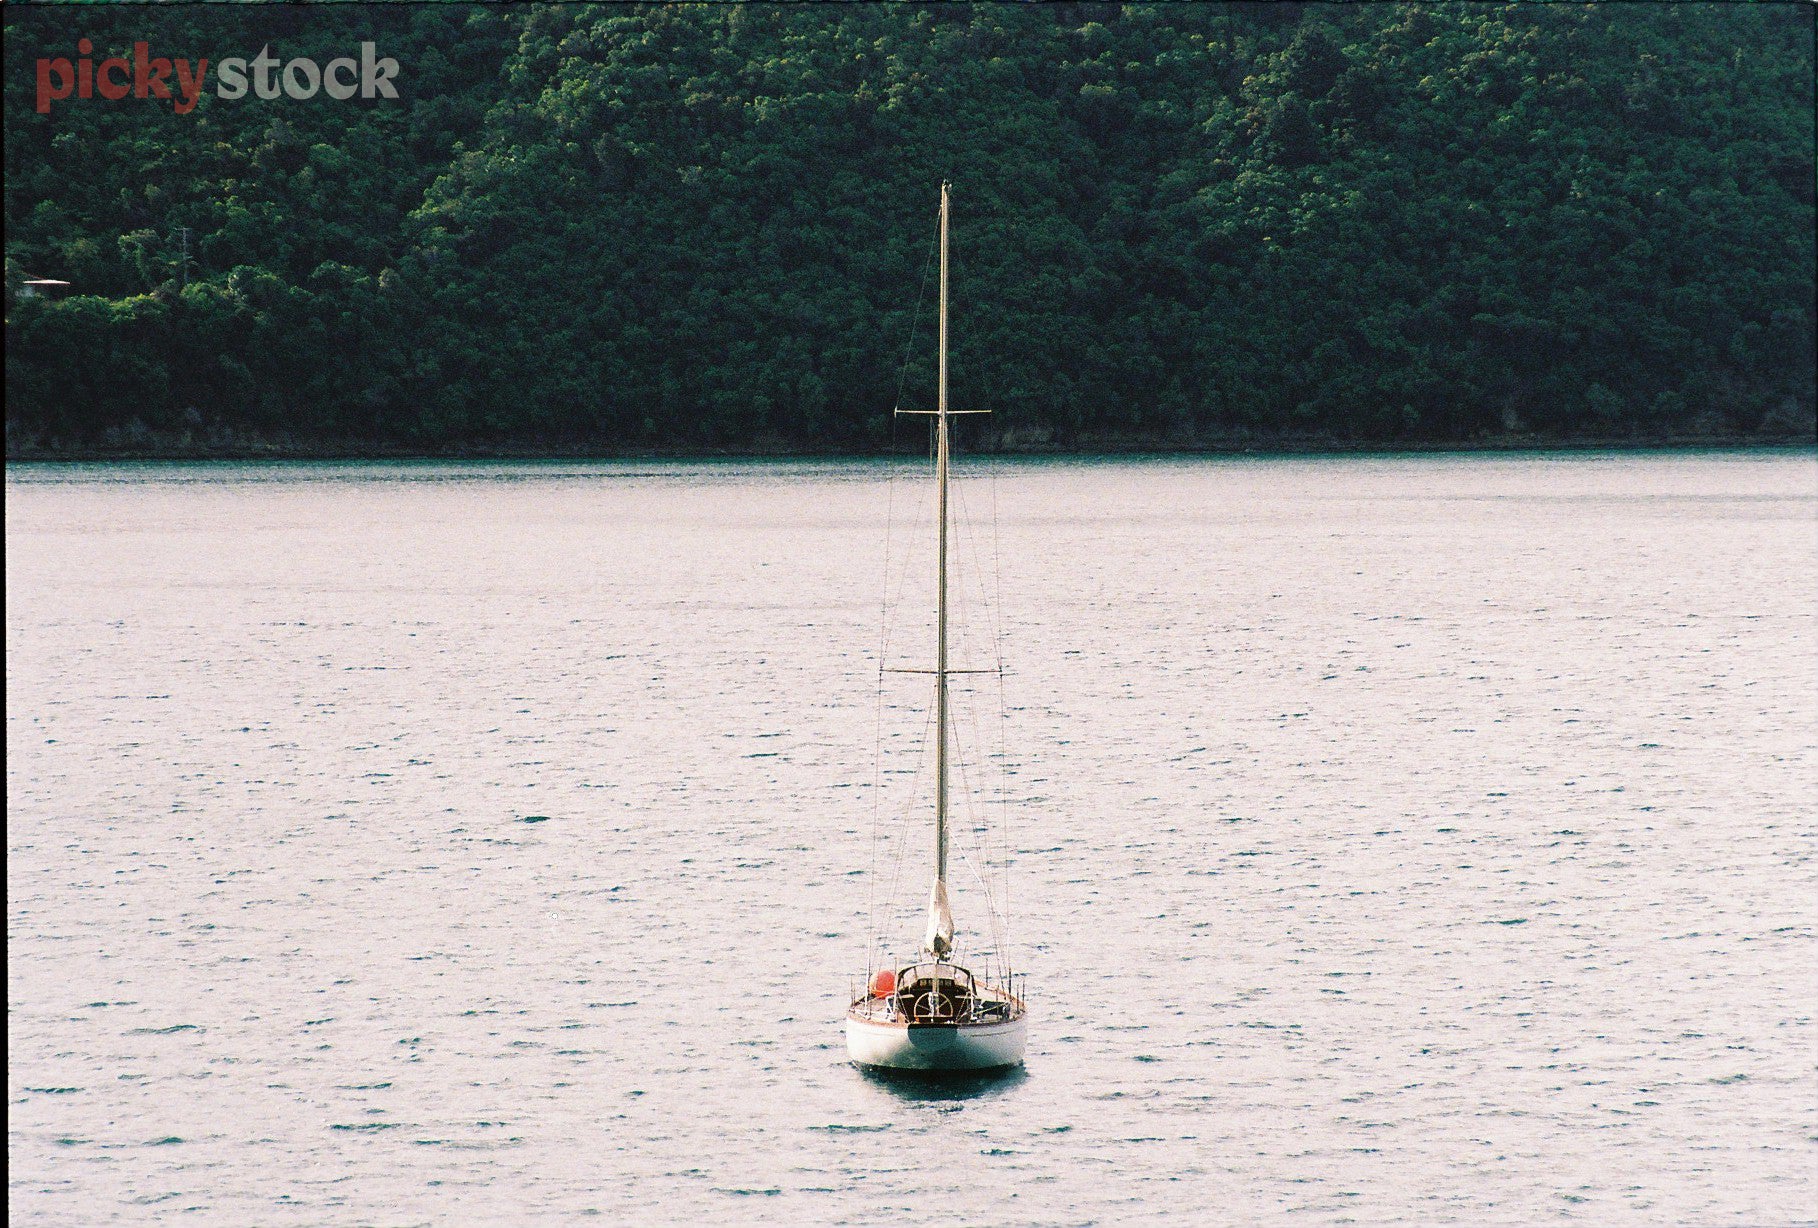 One single sailboat sits anchored in the calm bay. The boat is directed straight towards the camera, making for an angular & graphic layout. The sailboat's sail is down. 